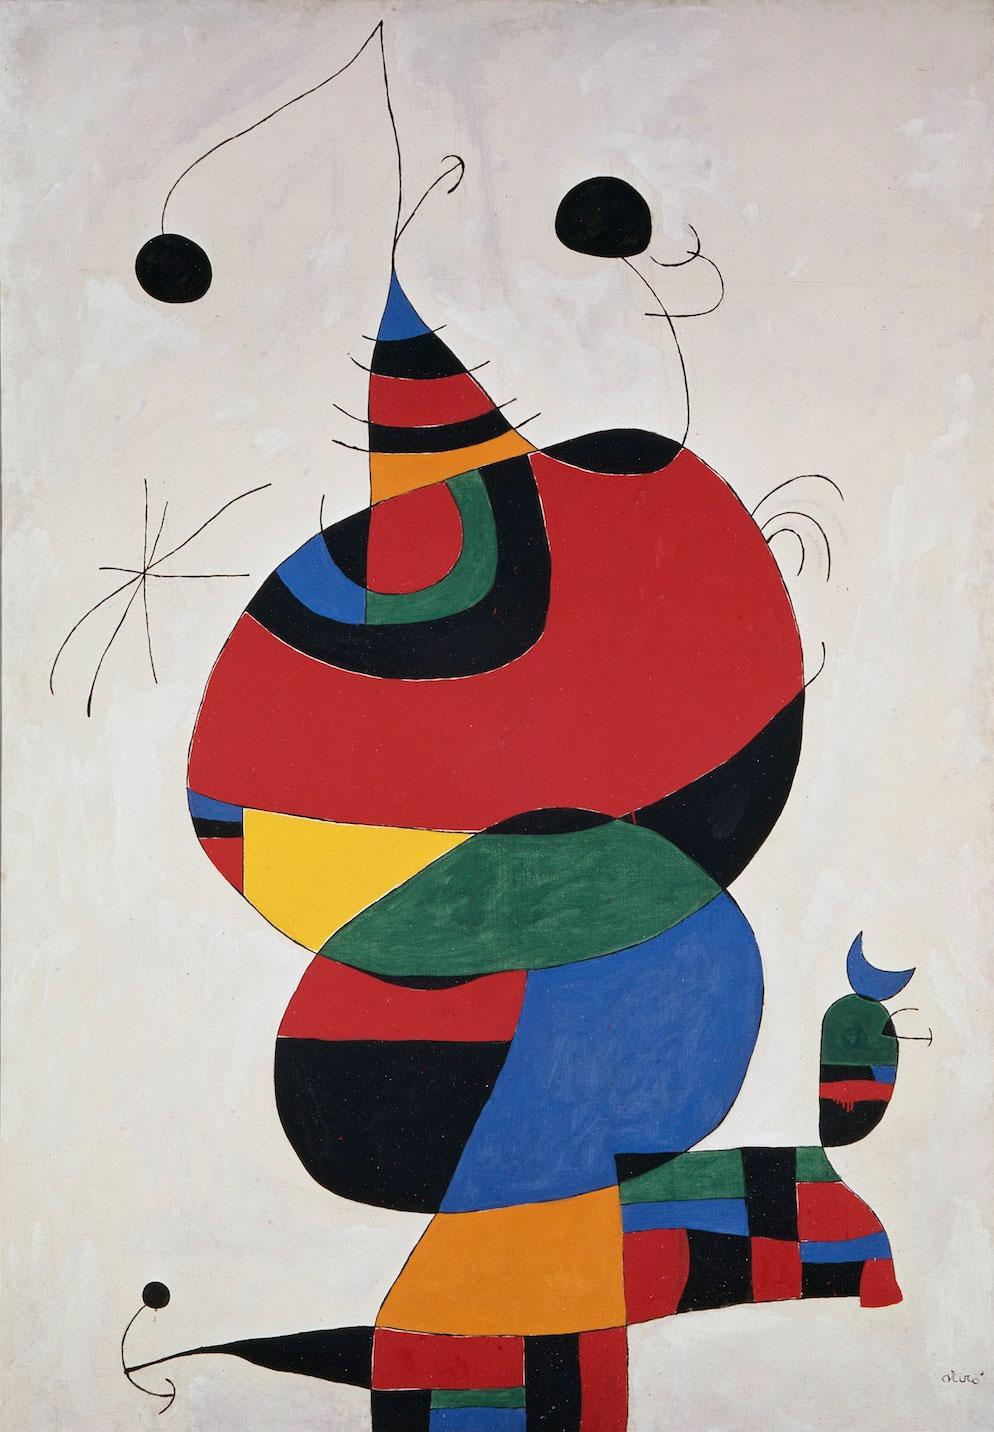 Photo: Woman, Bird, and Star by Joan Miró